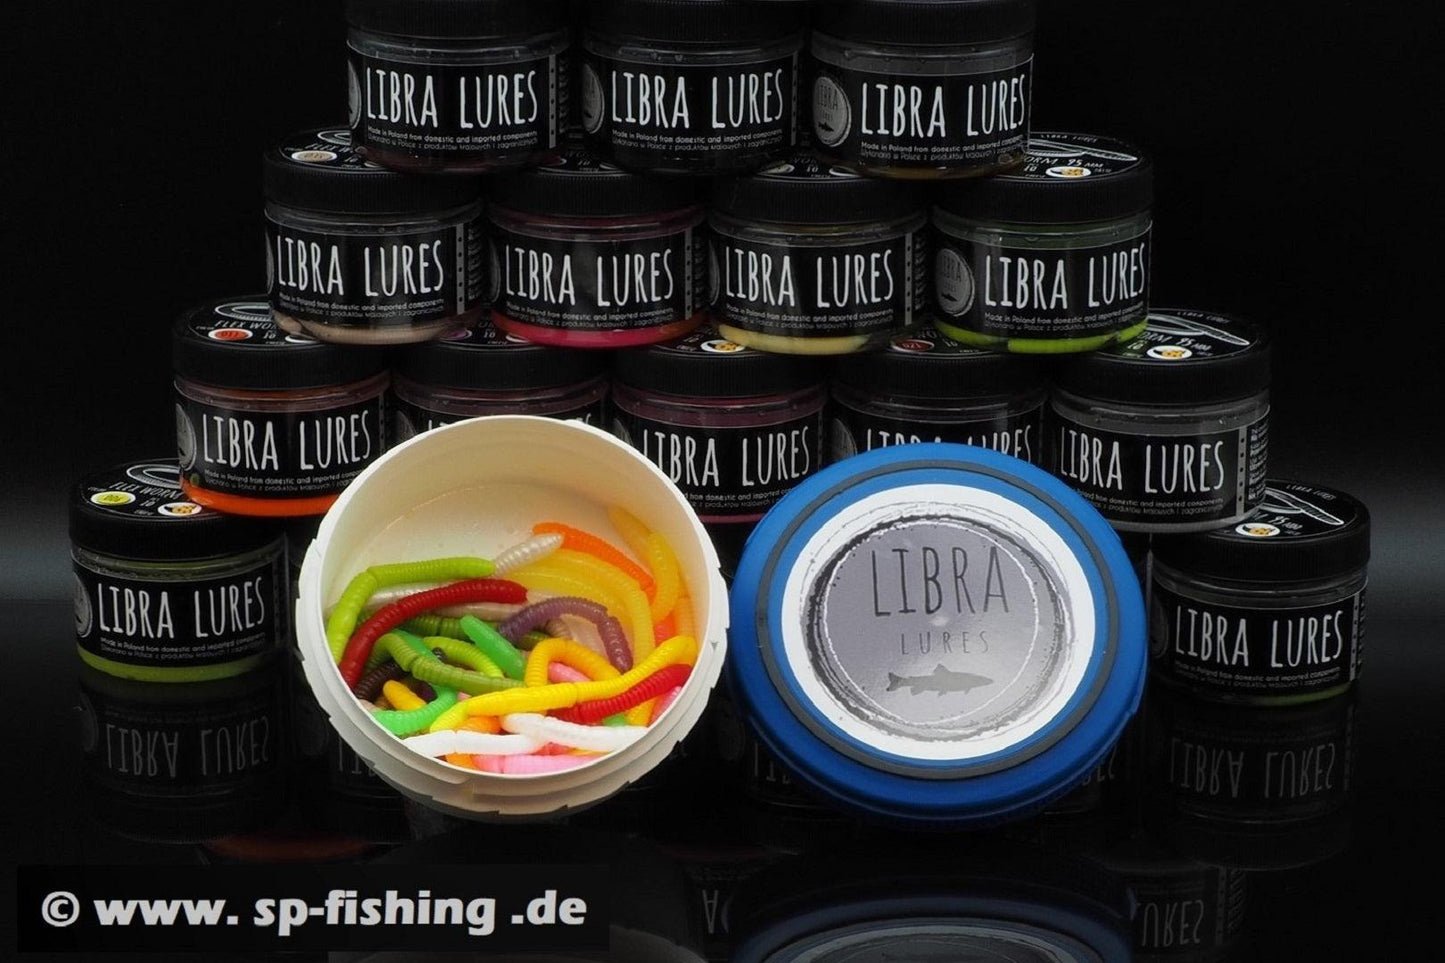 LIBRA LURES FATTY D'WORM TOURNAMENT 55mm Aroma Käse - SP-Fishing